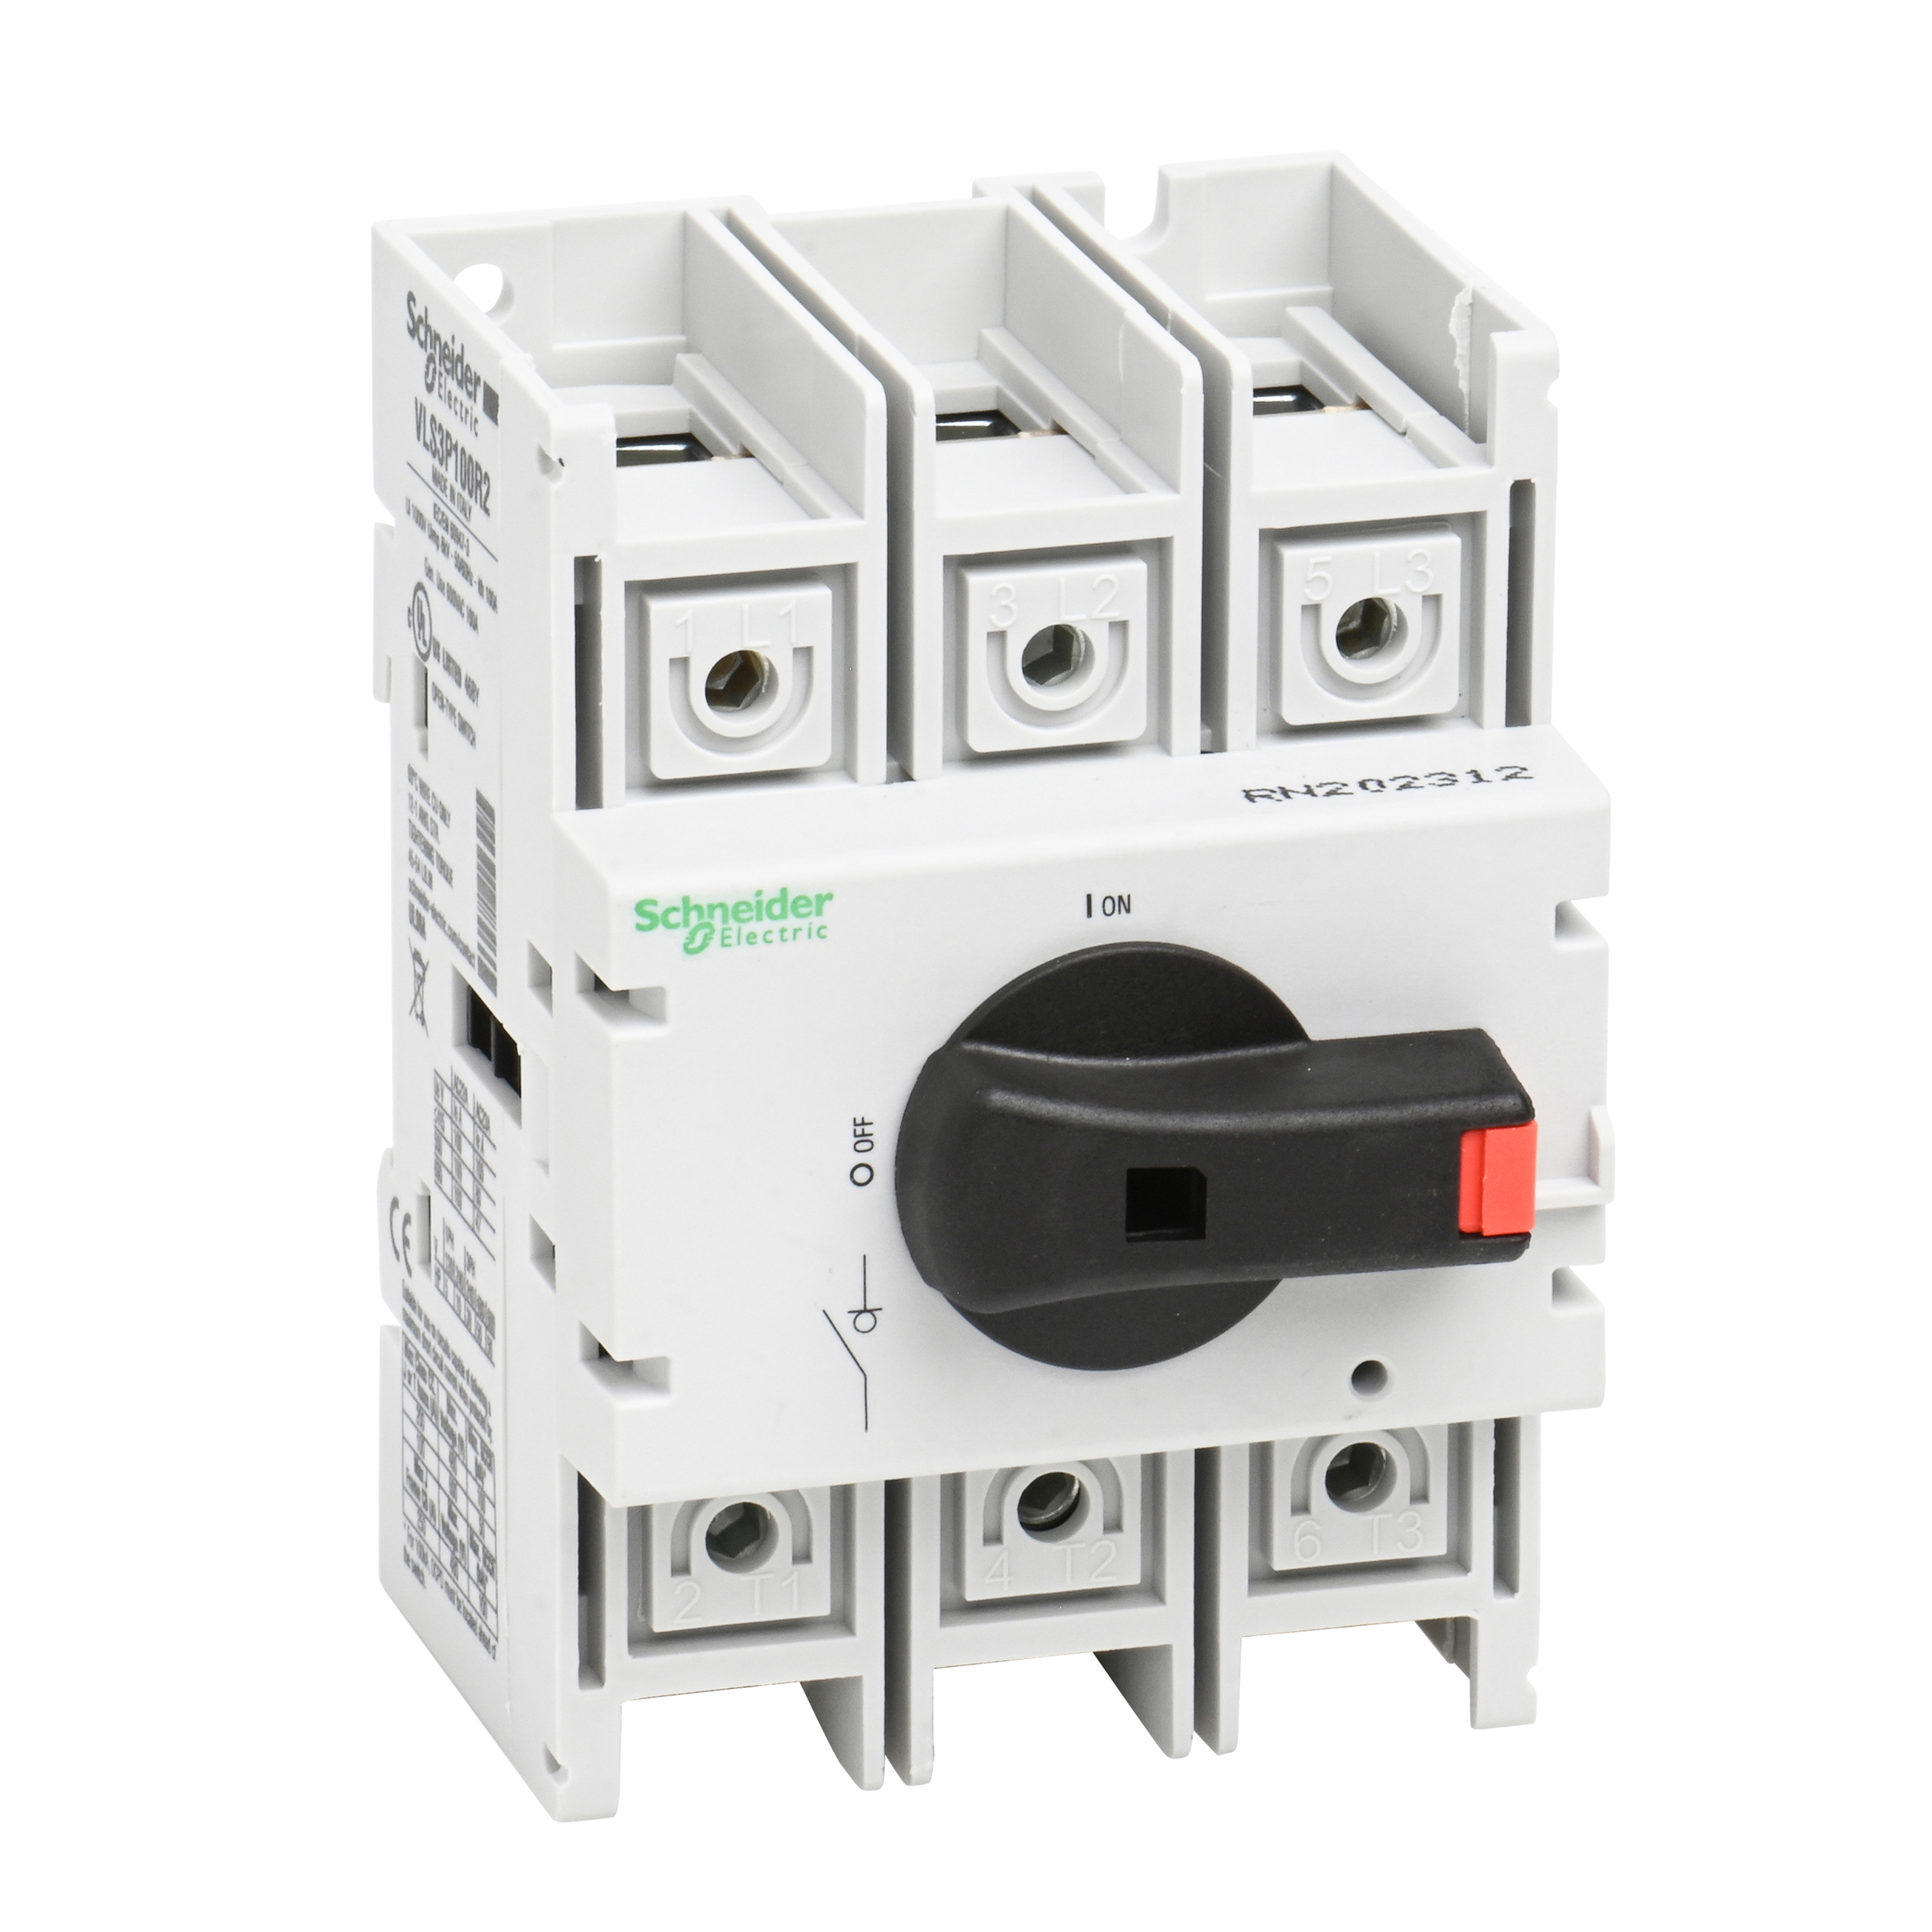 Disconnect switch, TeSys VLS, body switch, 100A, 50HP at 480VAC, UL98, three phase, 50kA SCCR, size 2, DIN rail mount